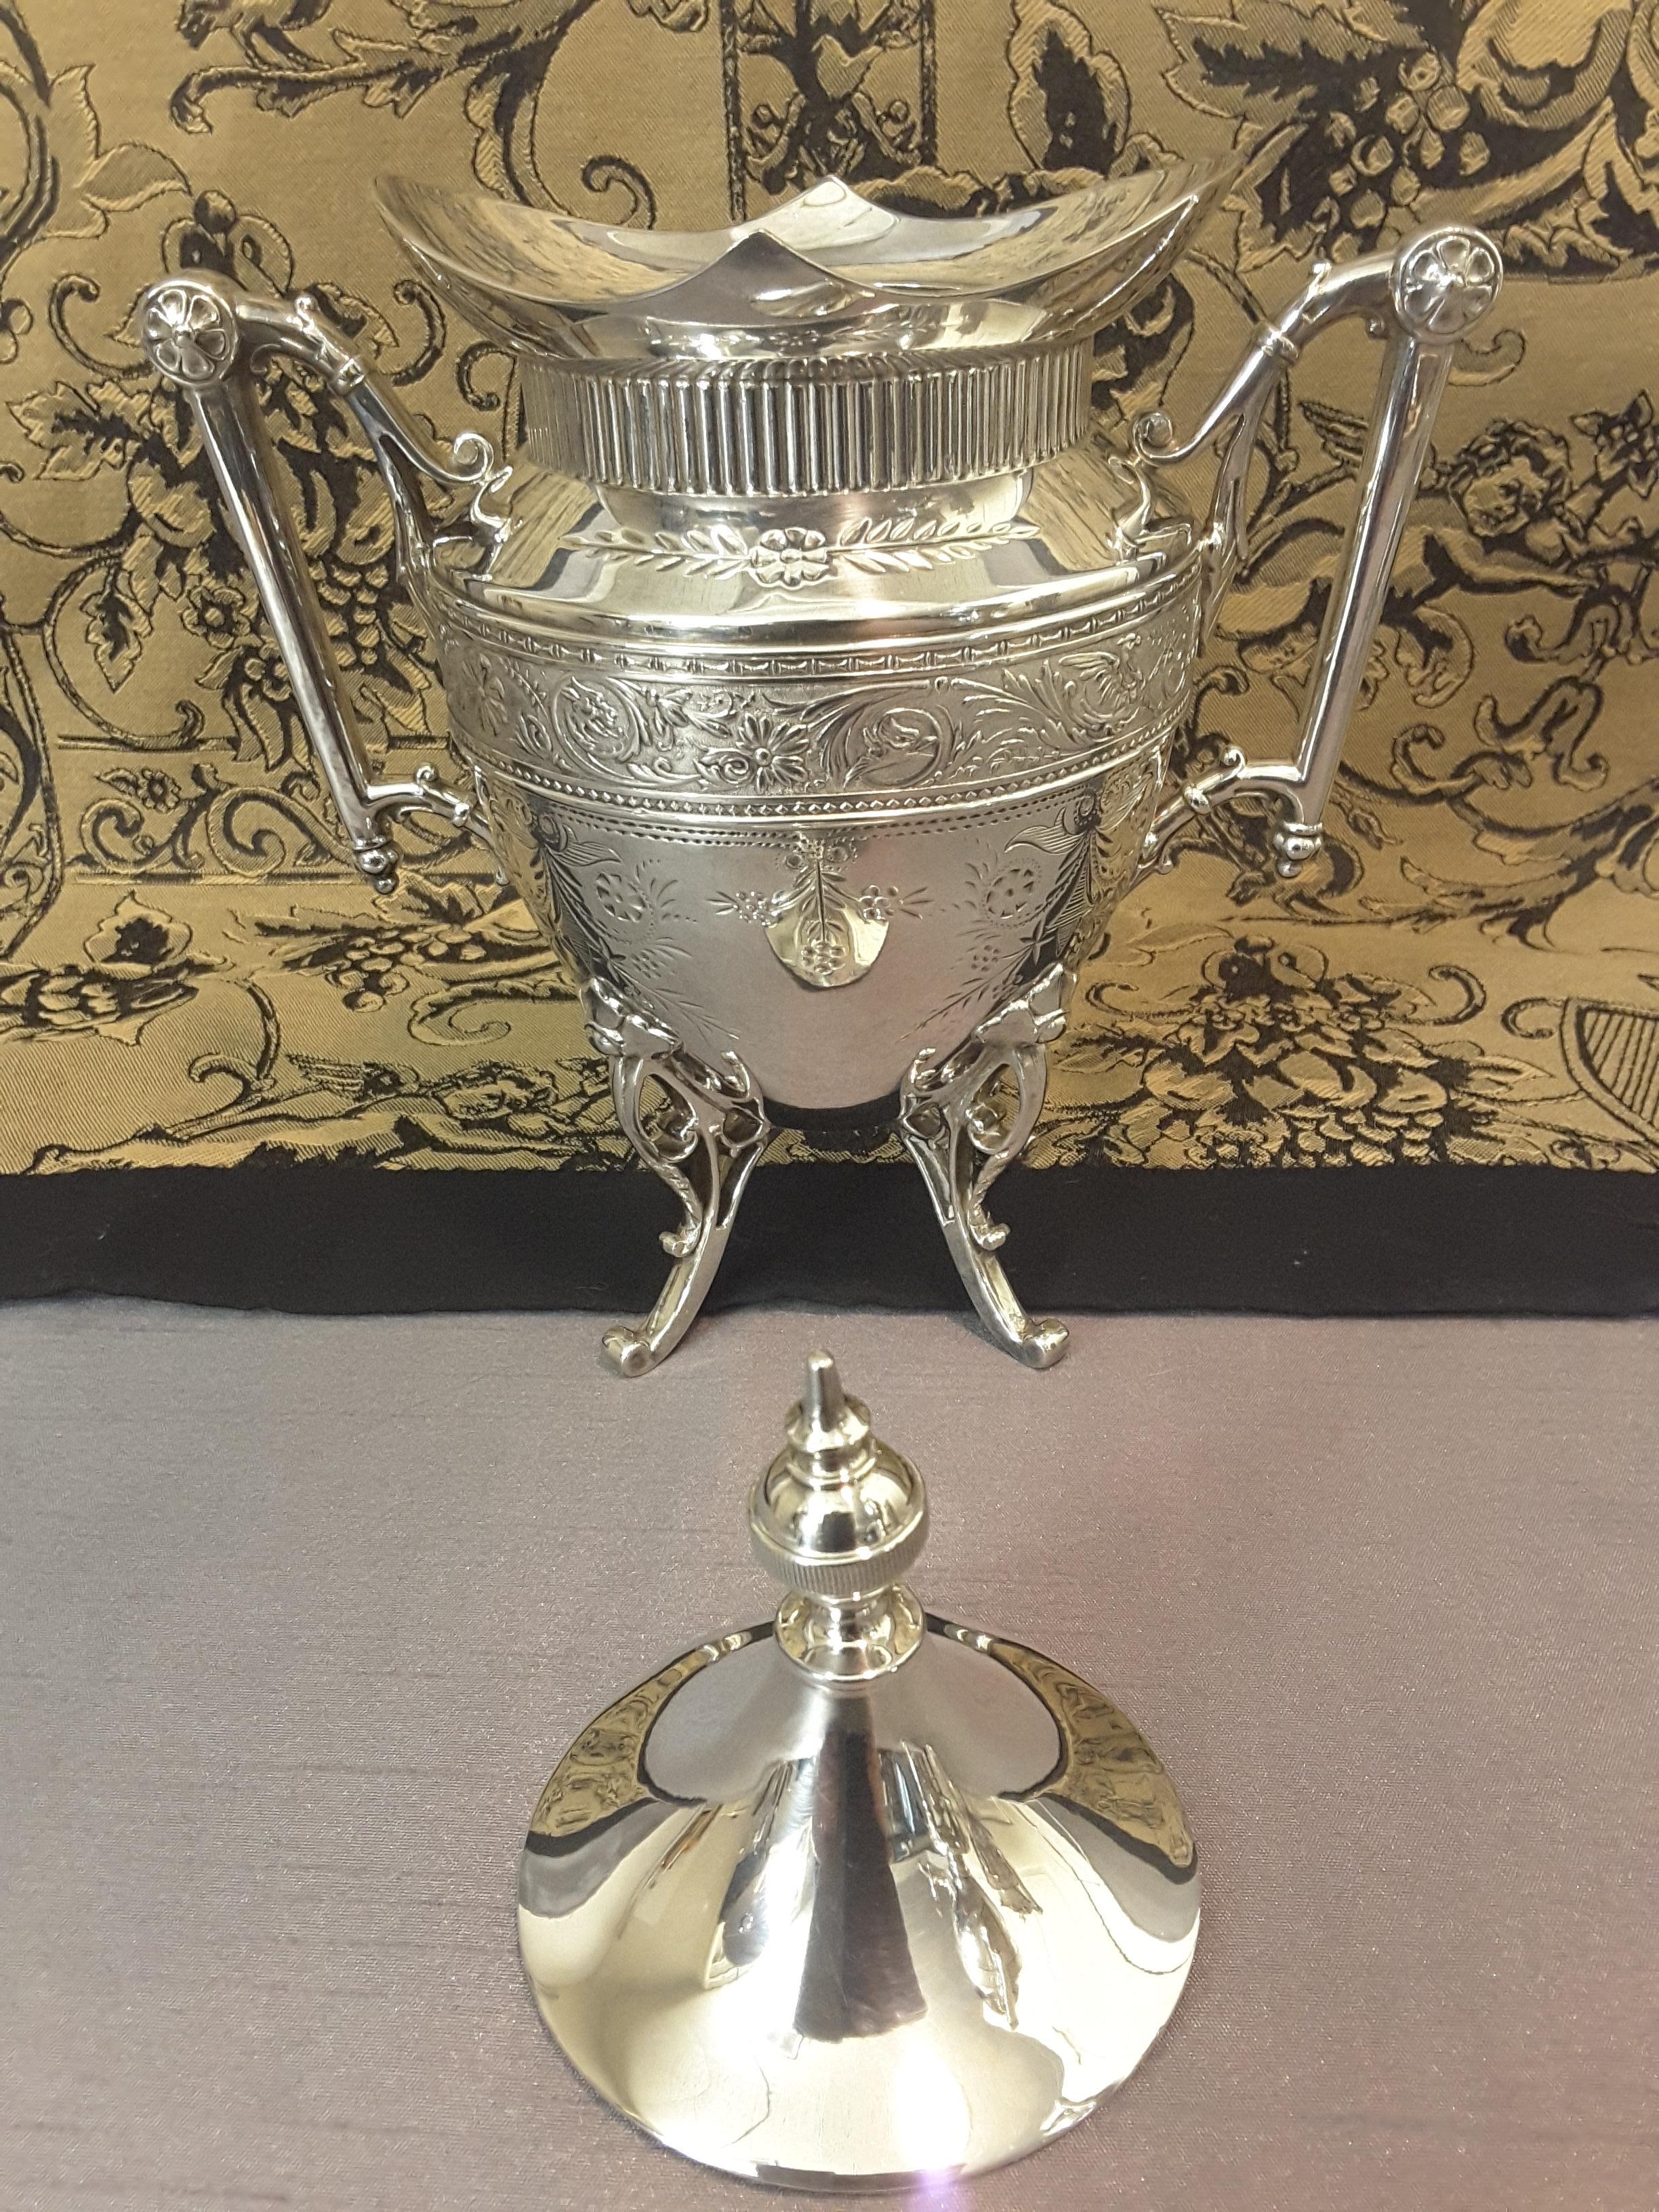 Exquisite Aesthetic Movement Silverplated Tea Service by Simpson, Hall & Miller For Sale 5